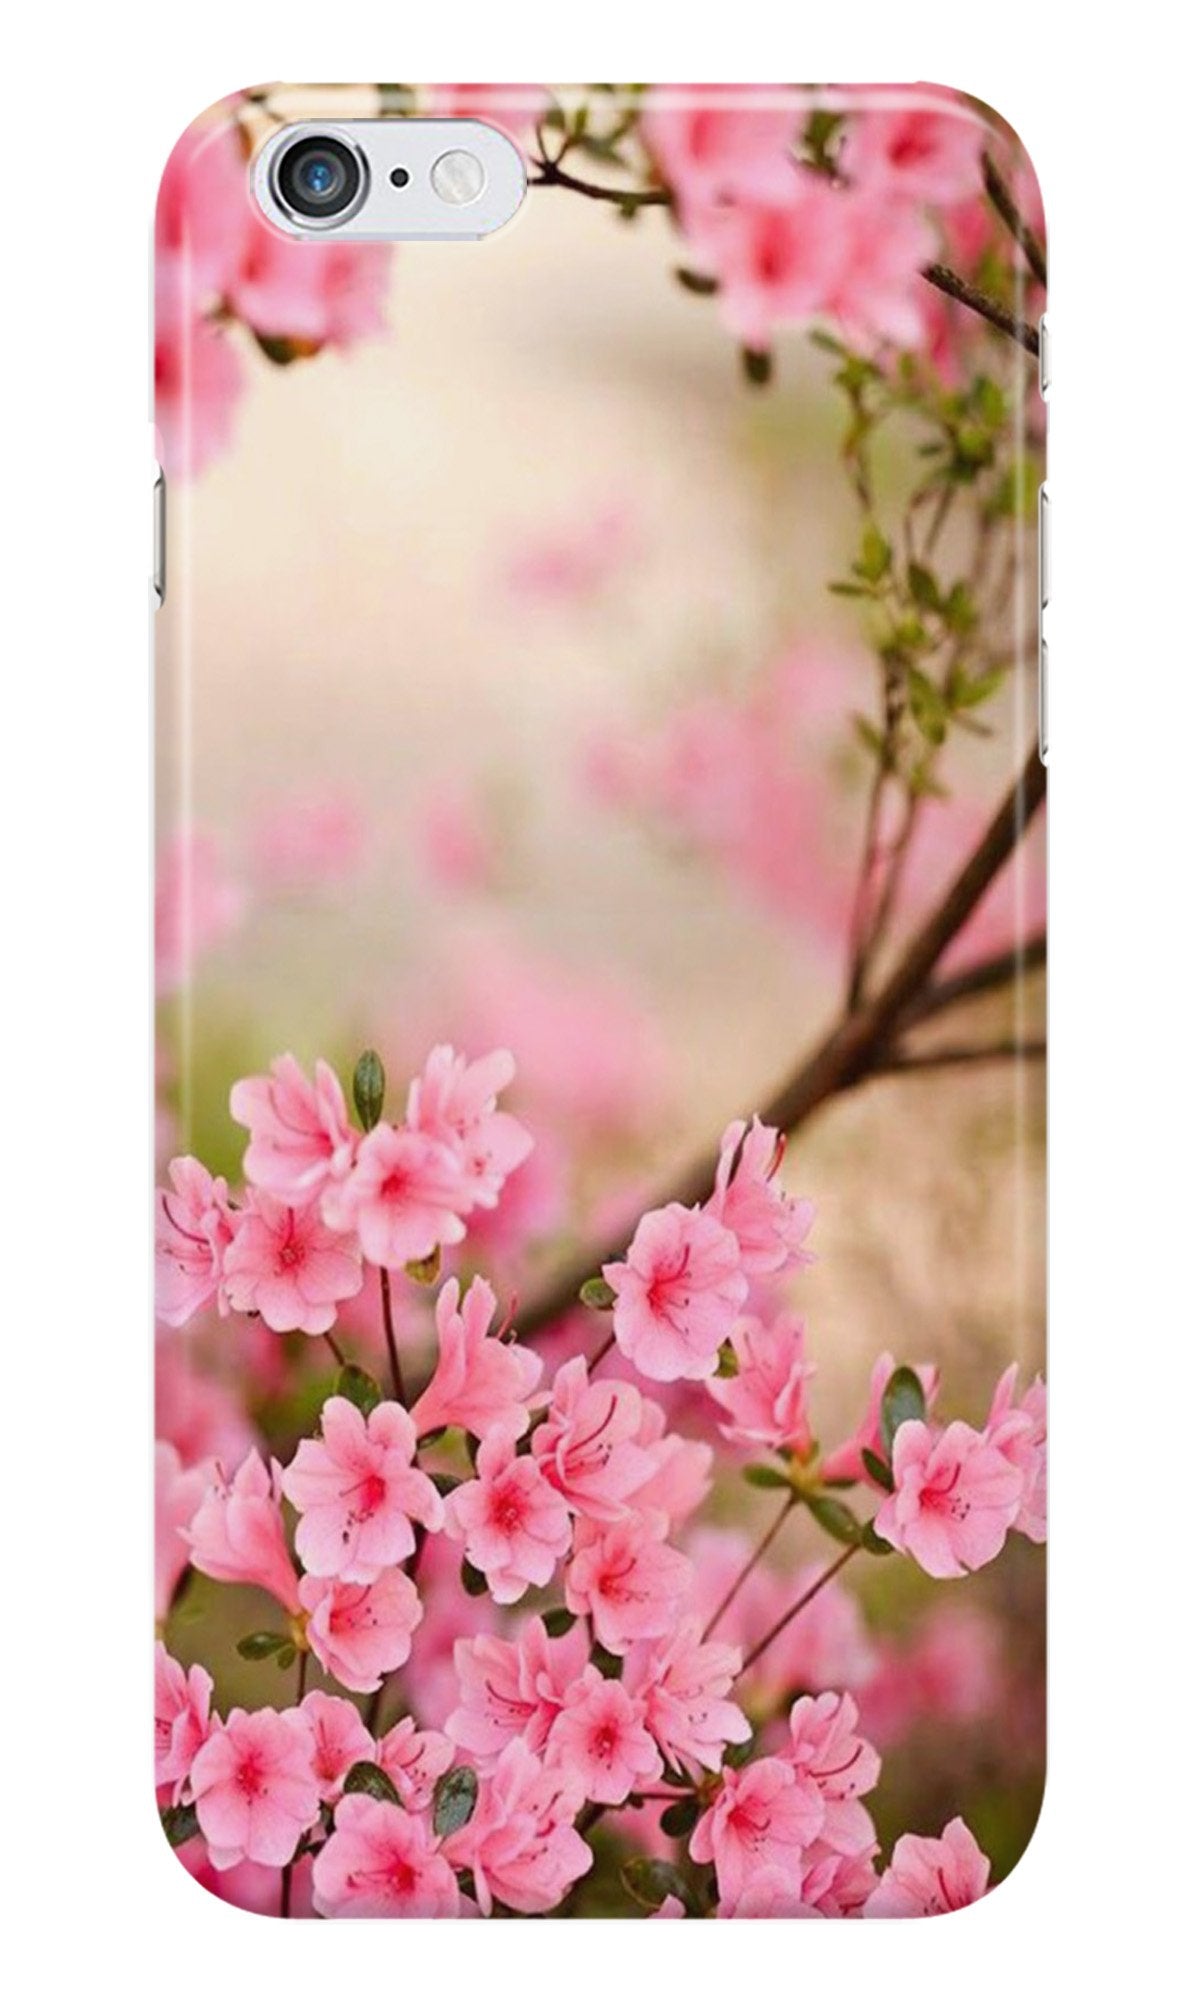 Pink flowers Case for iPhone 6 Plus/ 6s Plus